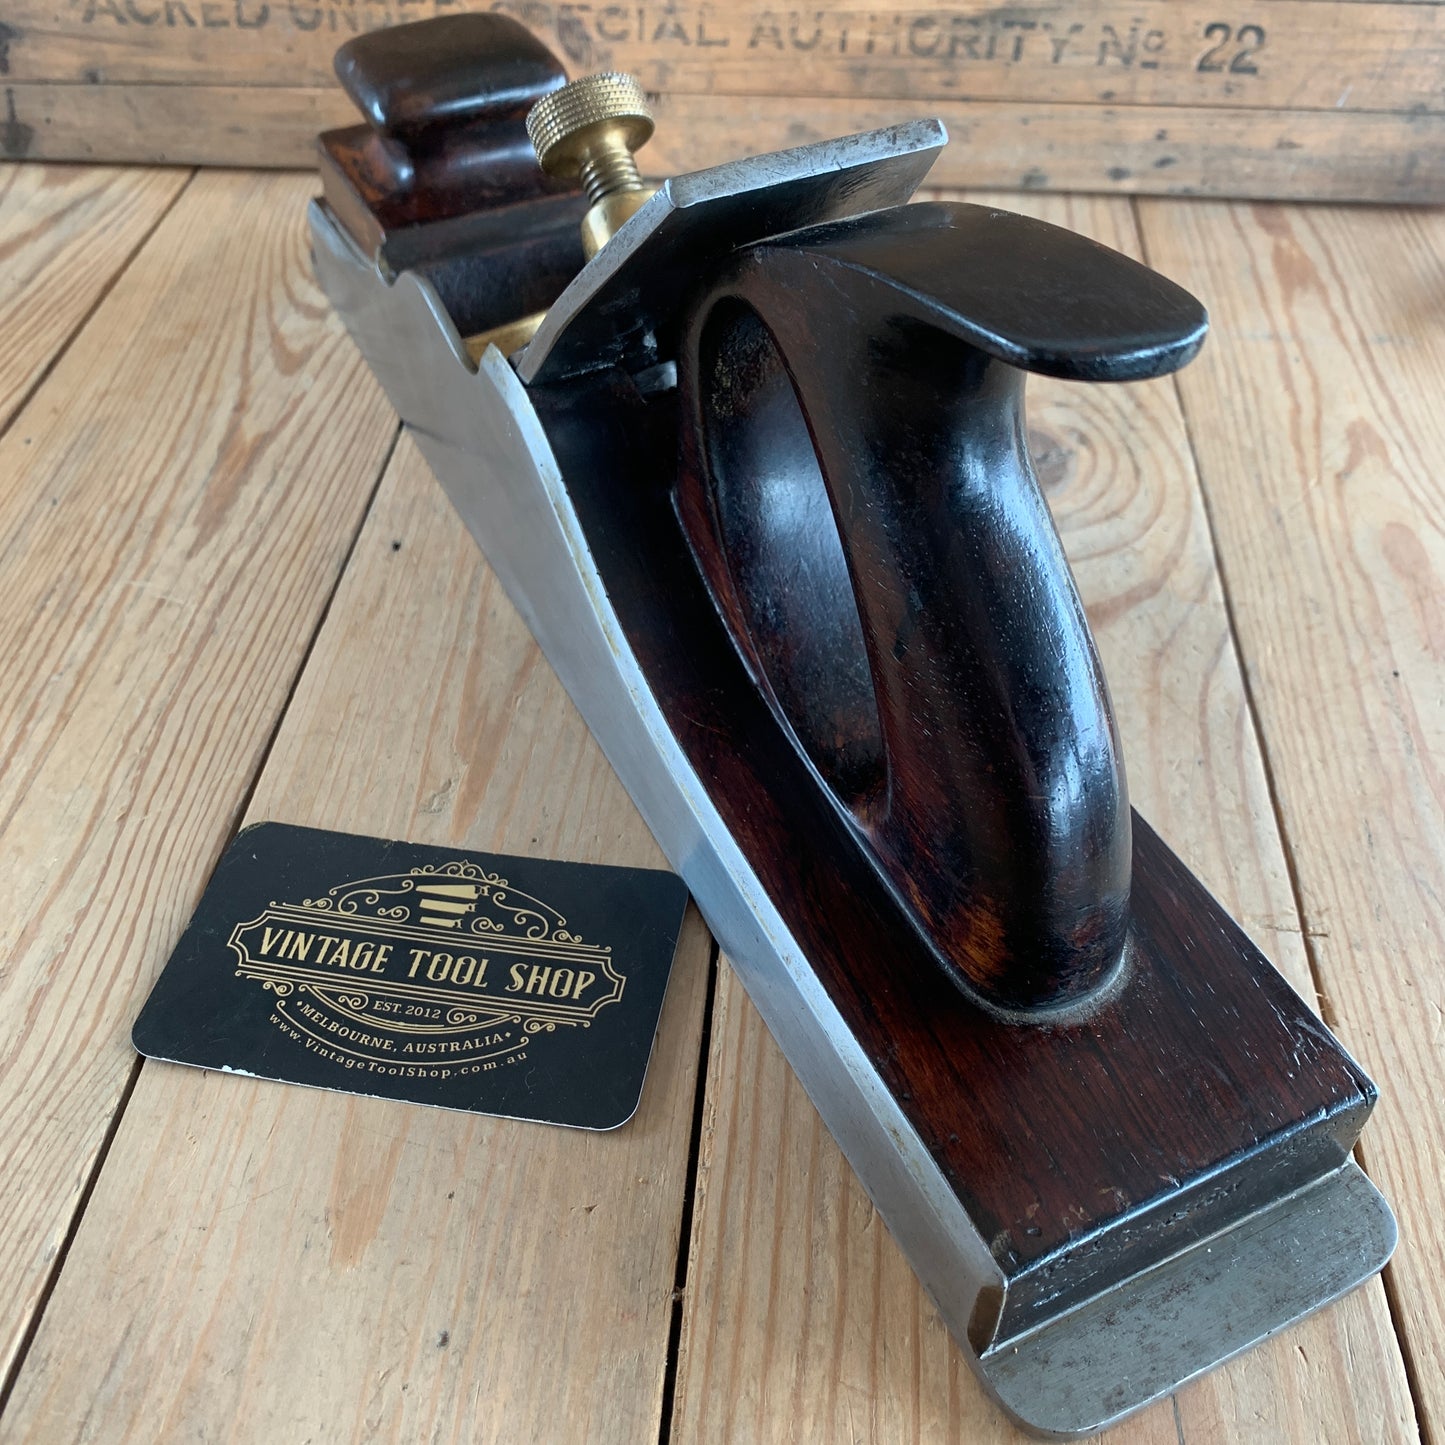 SOLD T9710 Antique NORRIS London No.1 14 1/2” Infill Jointing PLANE with Rosewood handles